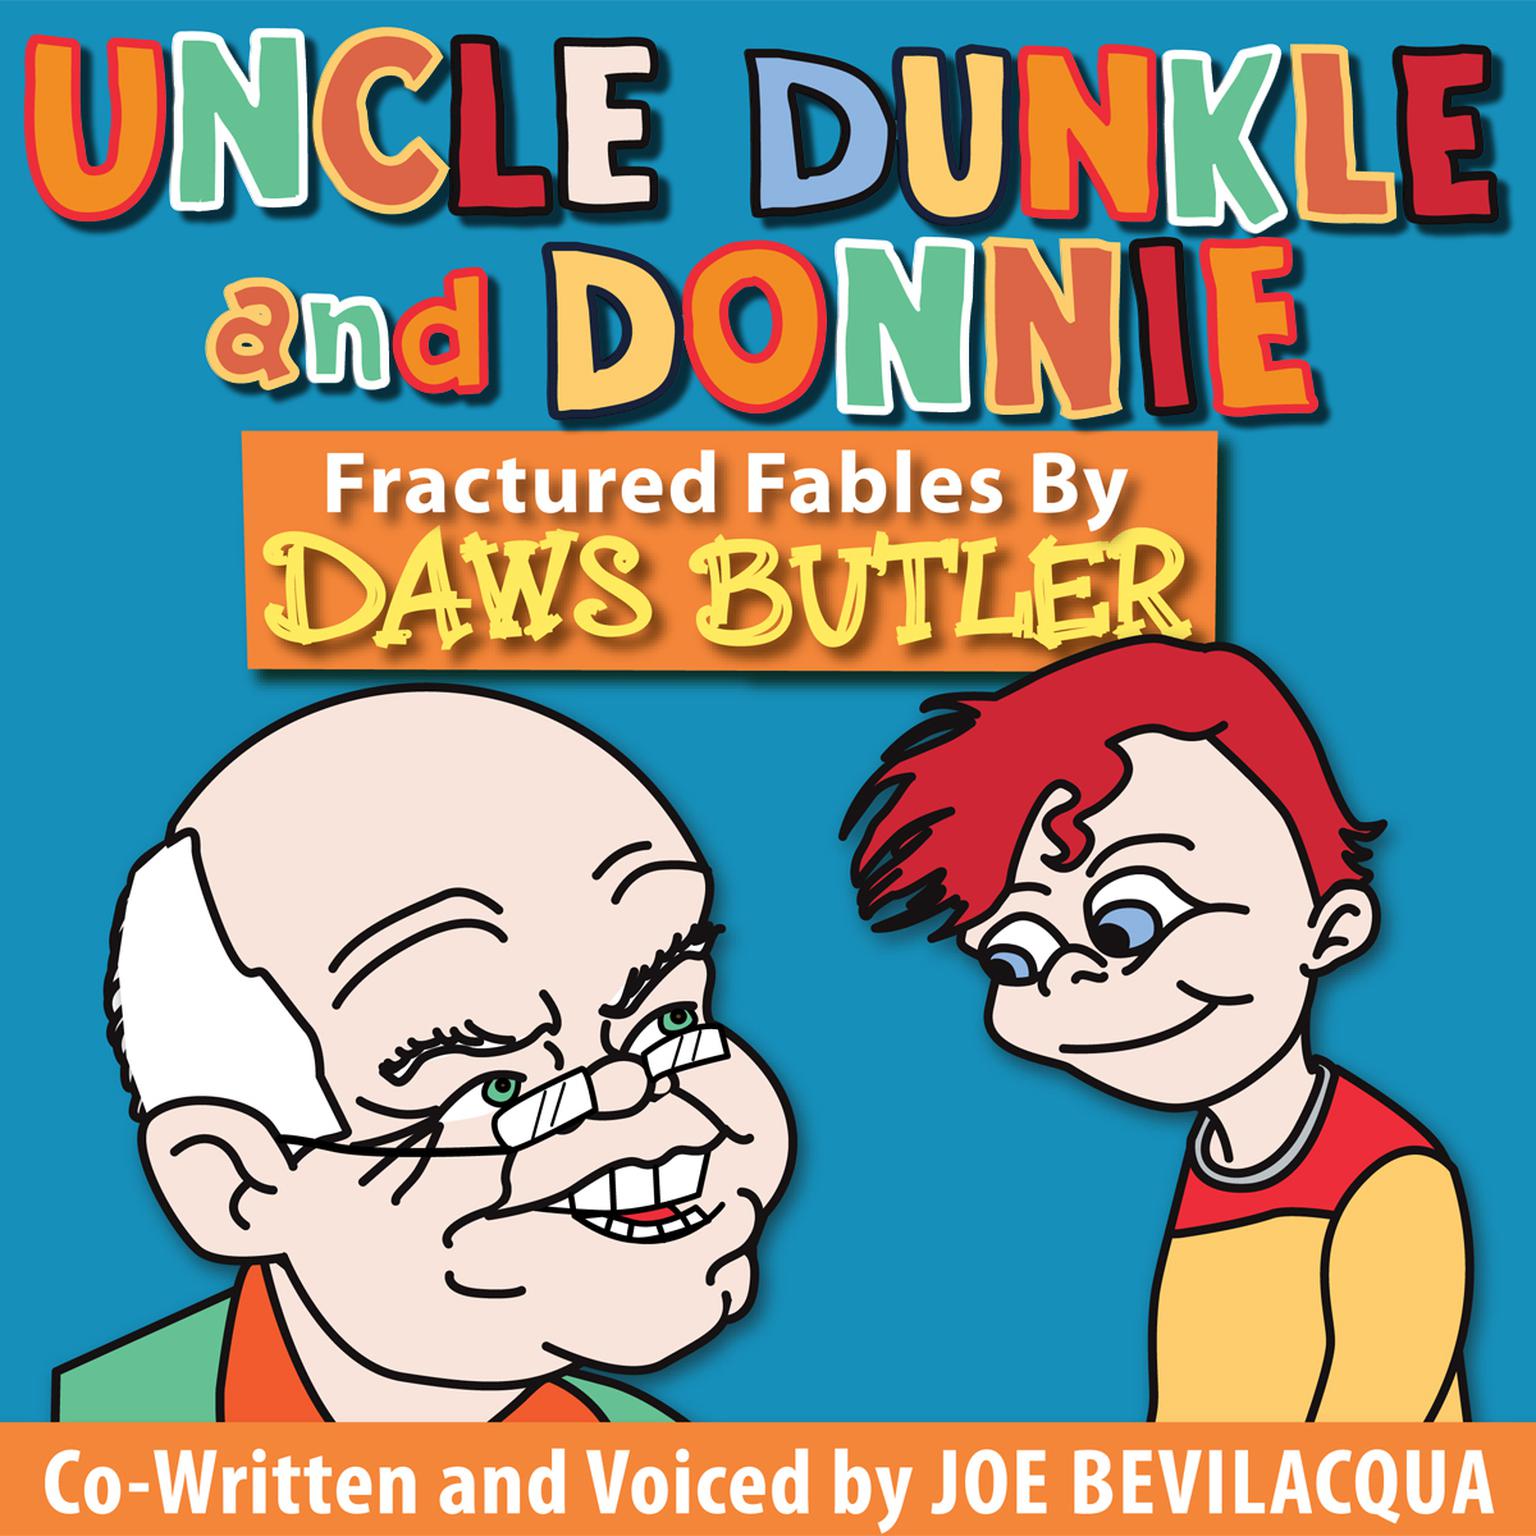 Uncle Dunkle and Donnie: Fractured Fables by Daws Butler Audiobook, by Joe Bevilacqua